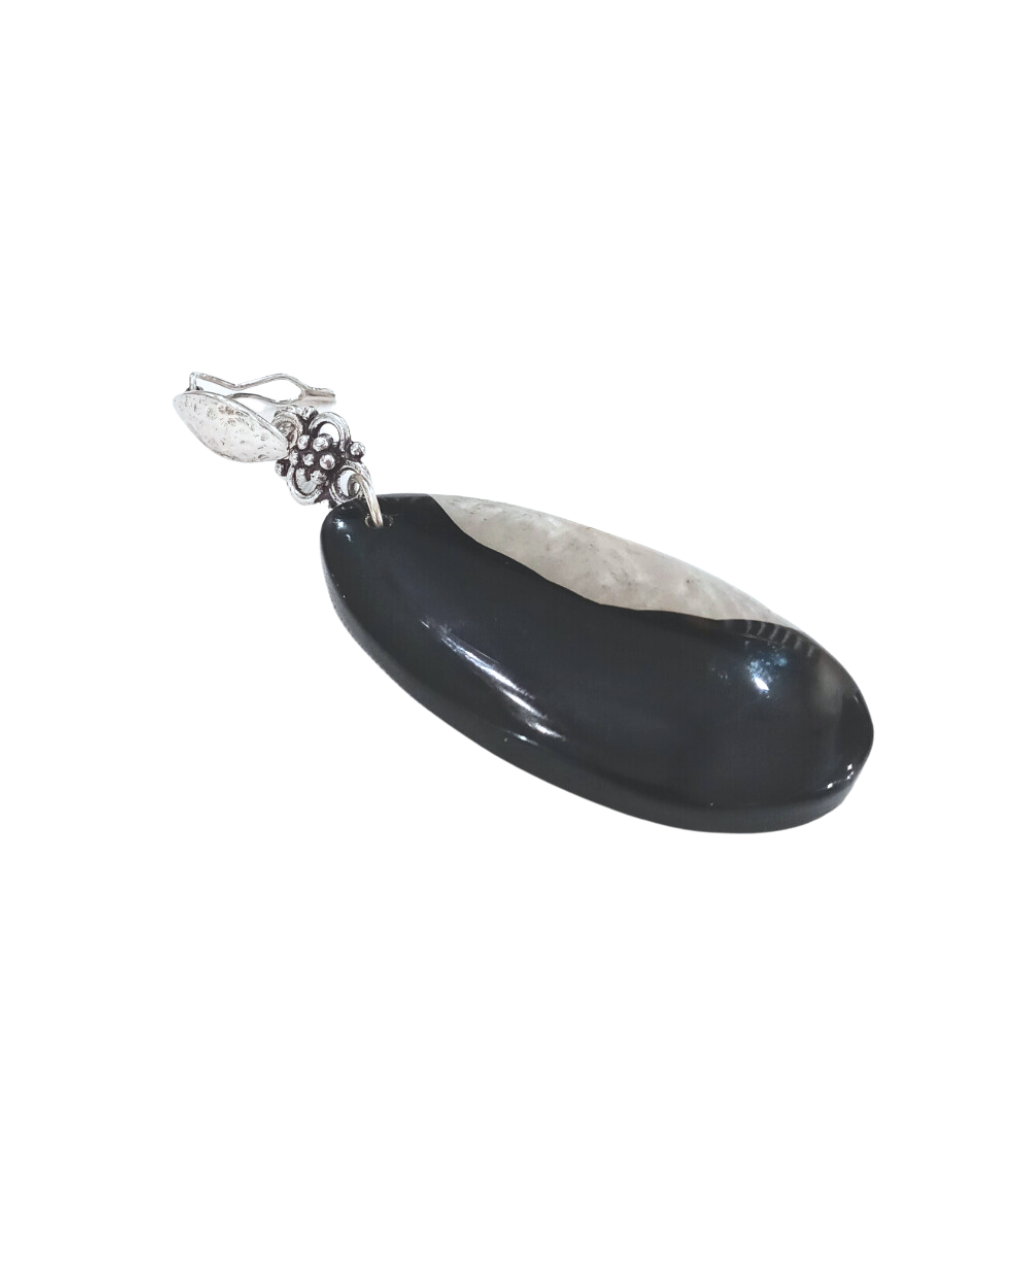 Black and Crystal Quartz Blended Gorgeous Agate Sterling Enhancer Design Pendant with Unique Removable Interchangeable Clip 3 1/8"L X 1 3/16"W ONE ONLY